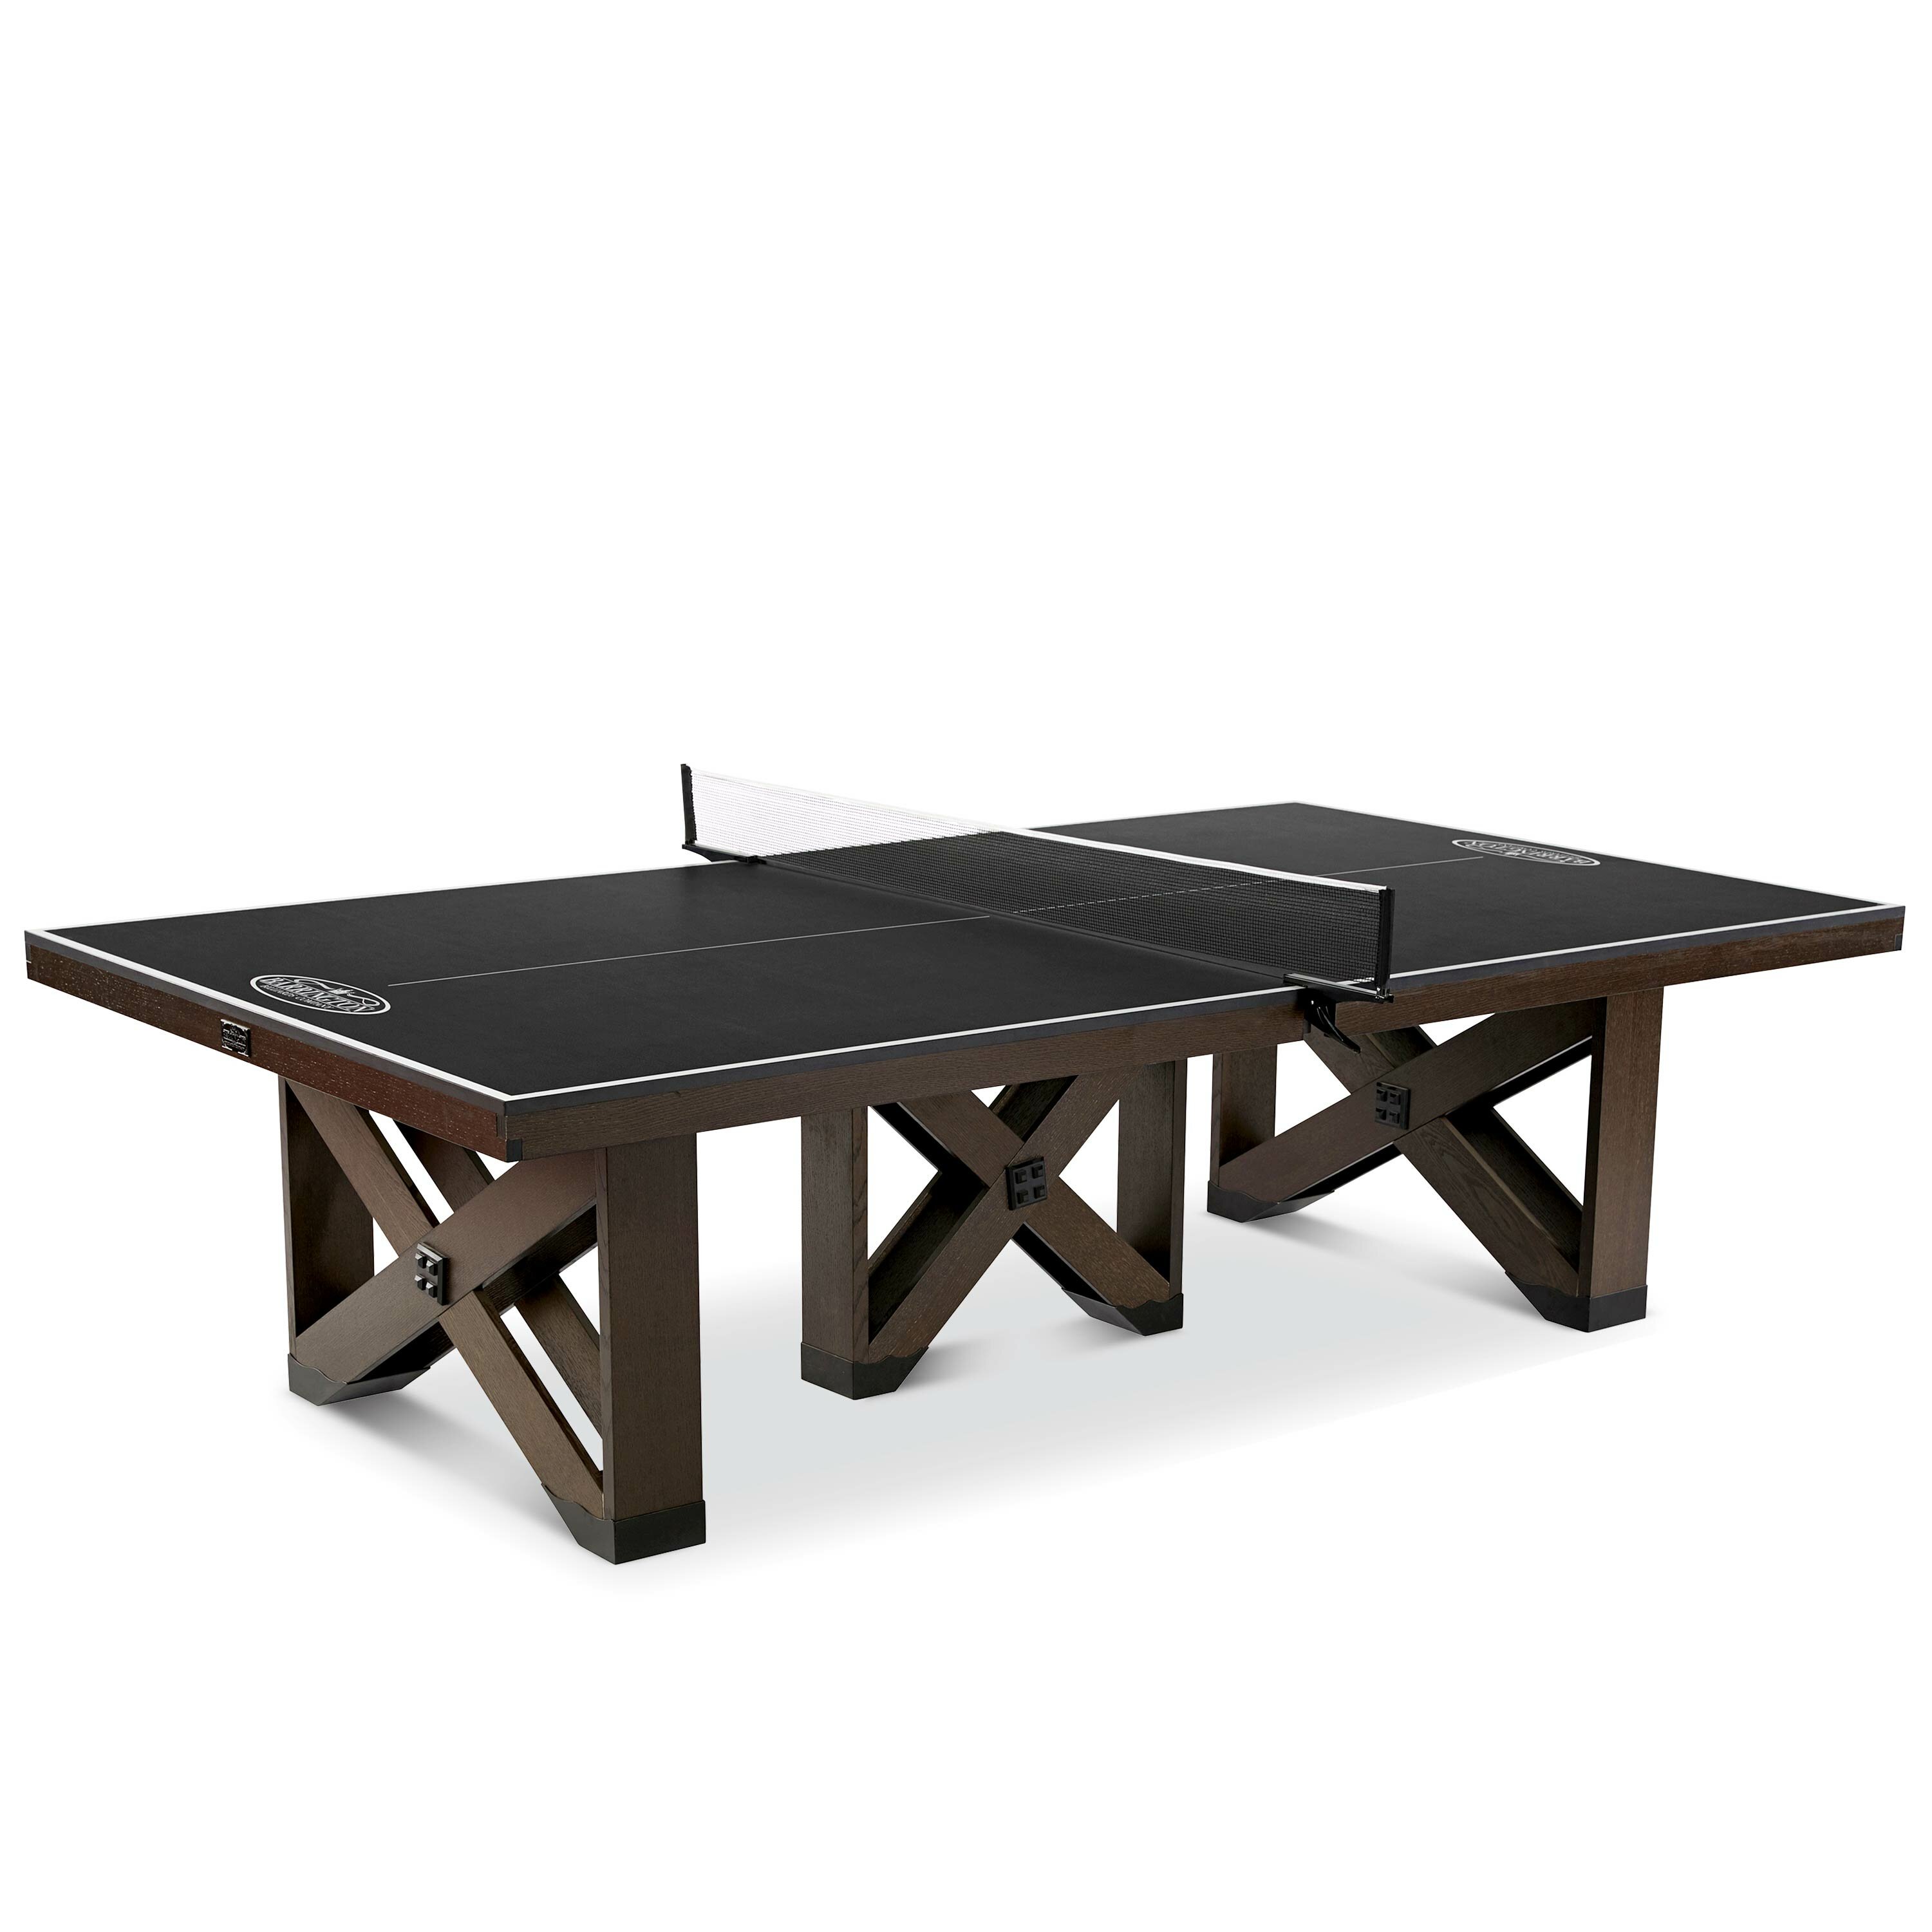 Barrington Billiards Company Barrington Fremont Collection Official Size  2-Piece Indoor Table Tennis Table, 18mm Thick  Reviews Wayfair